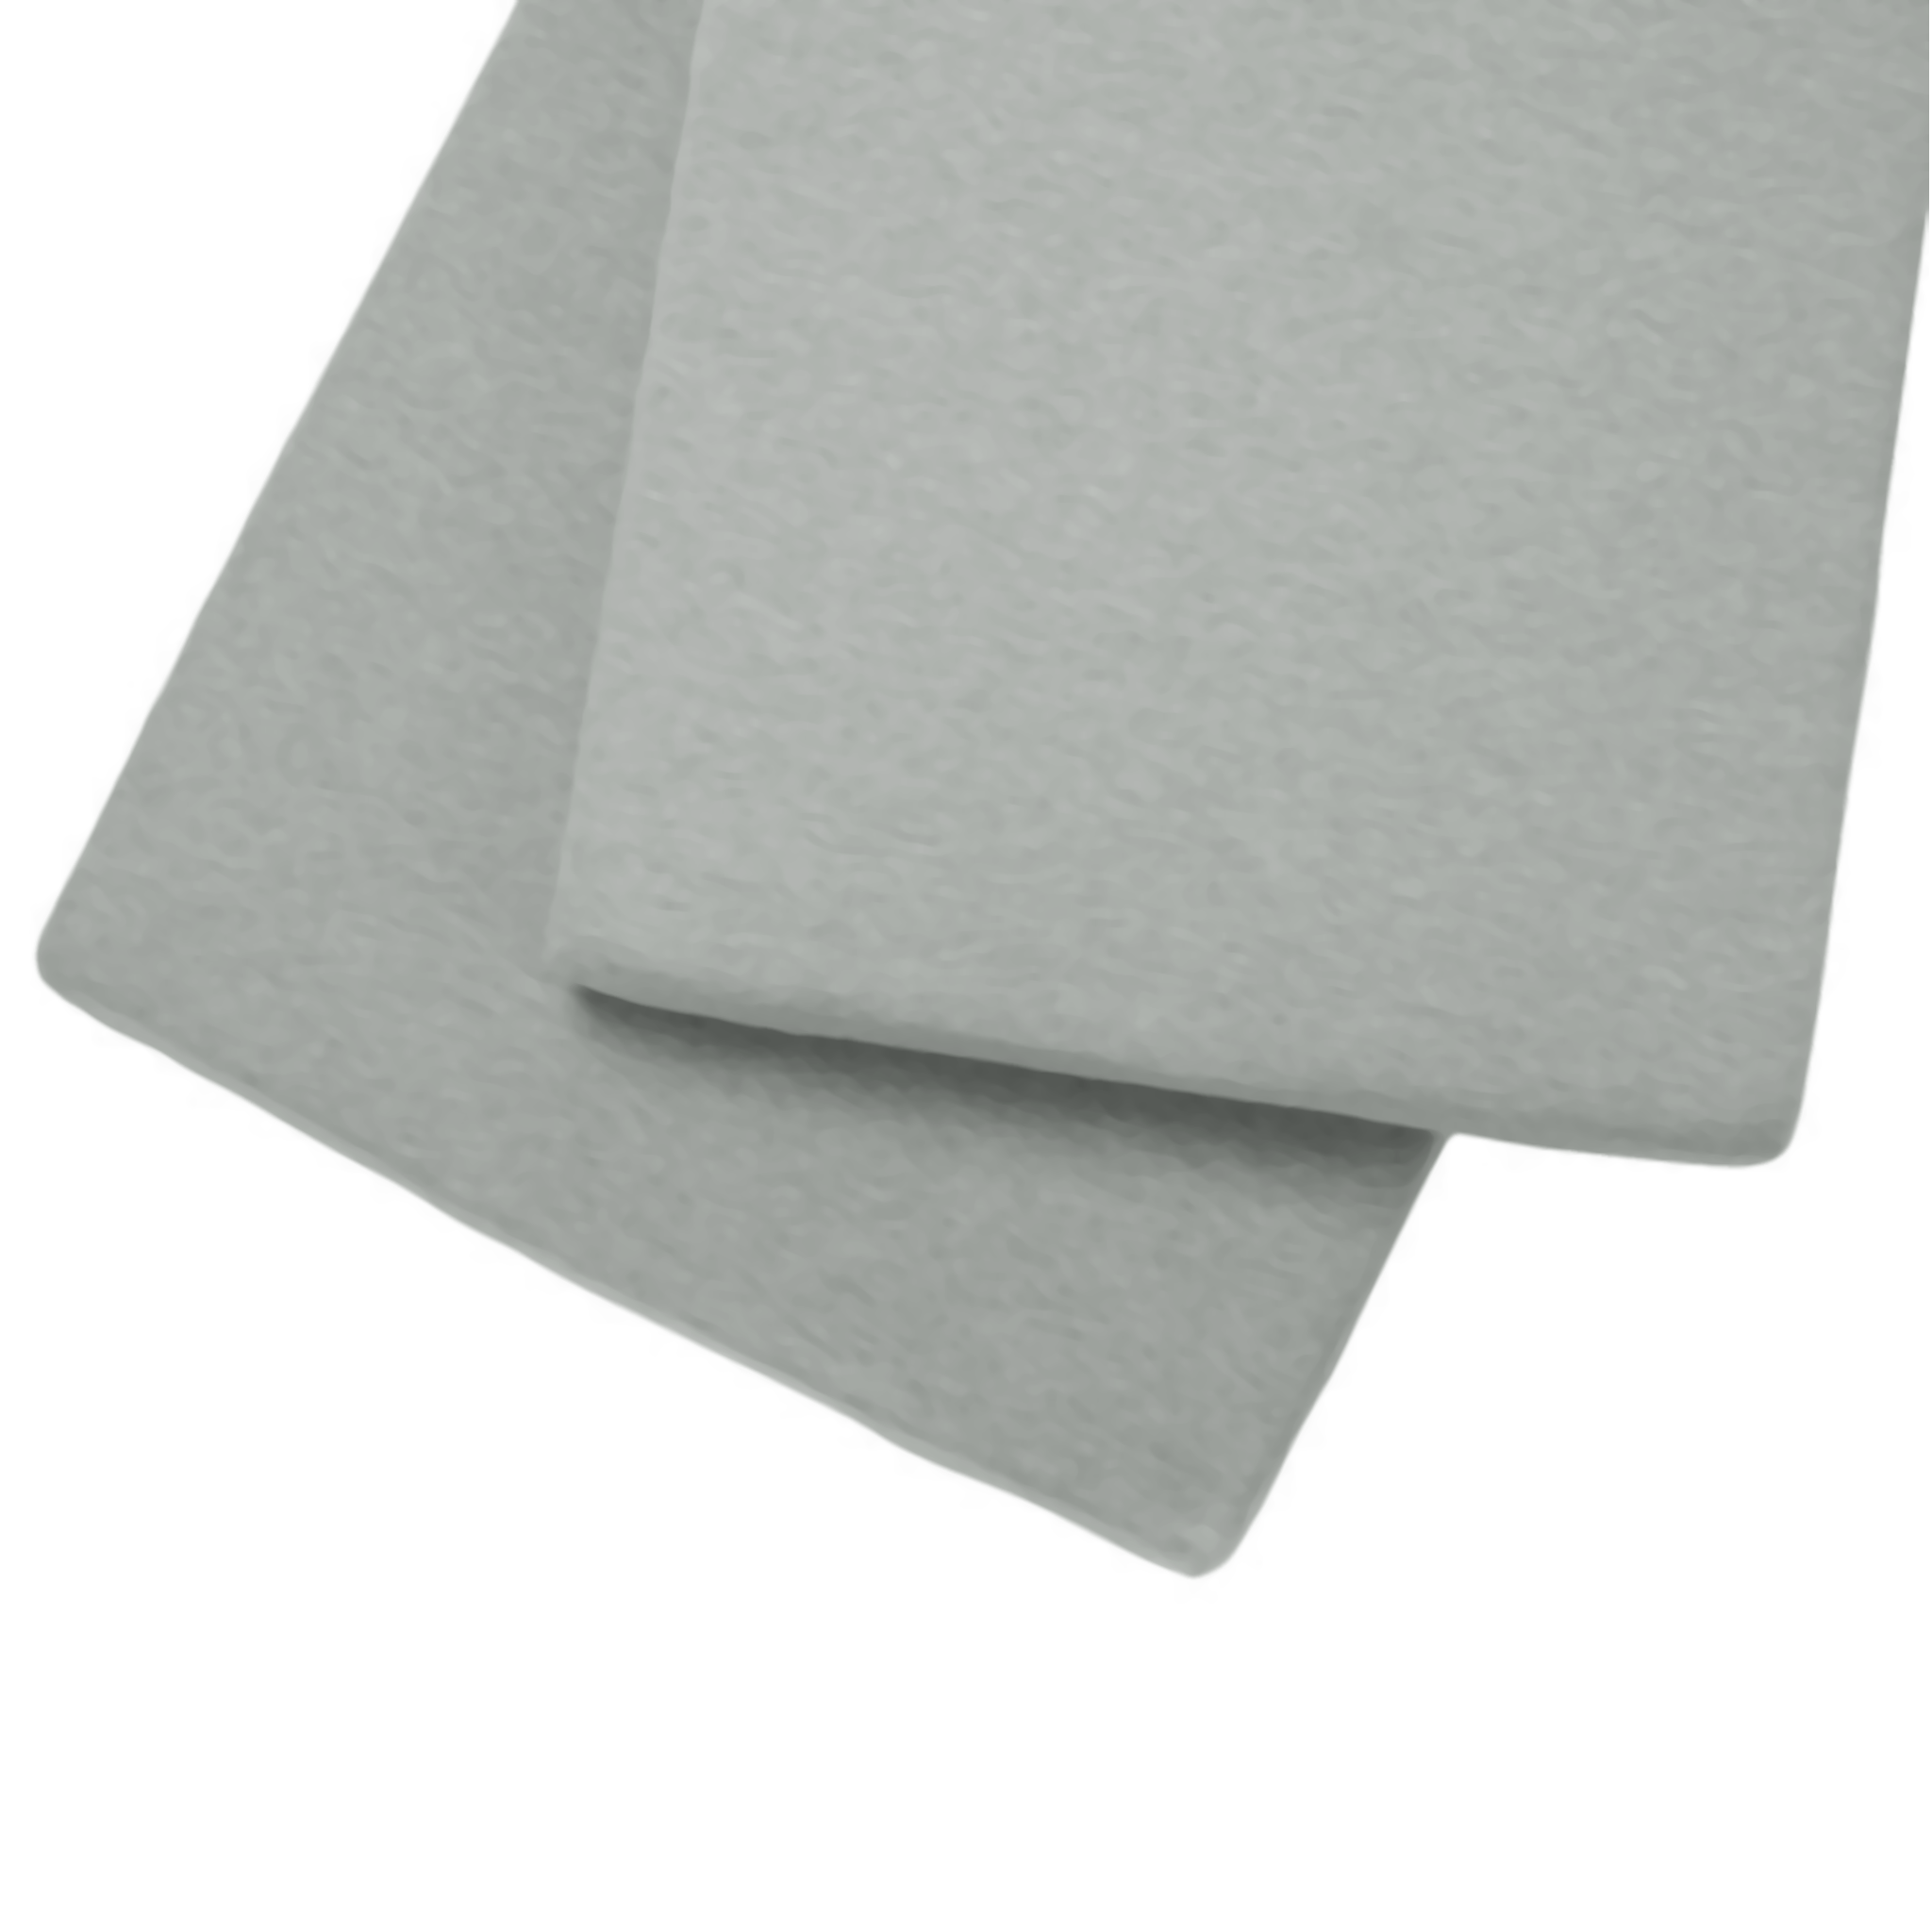 Clair De Lune cot bed sheets Clair De Lune Cot Bed Fitted Sheet 2 Pack Grey CL3029GY